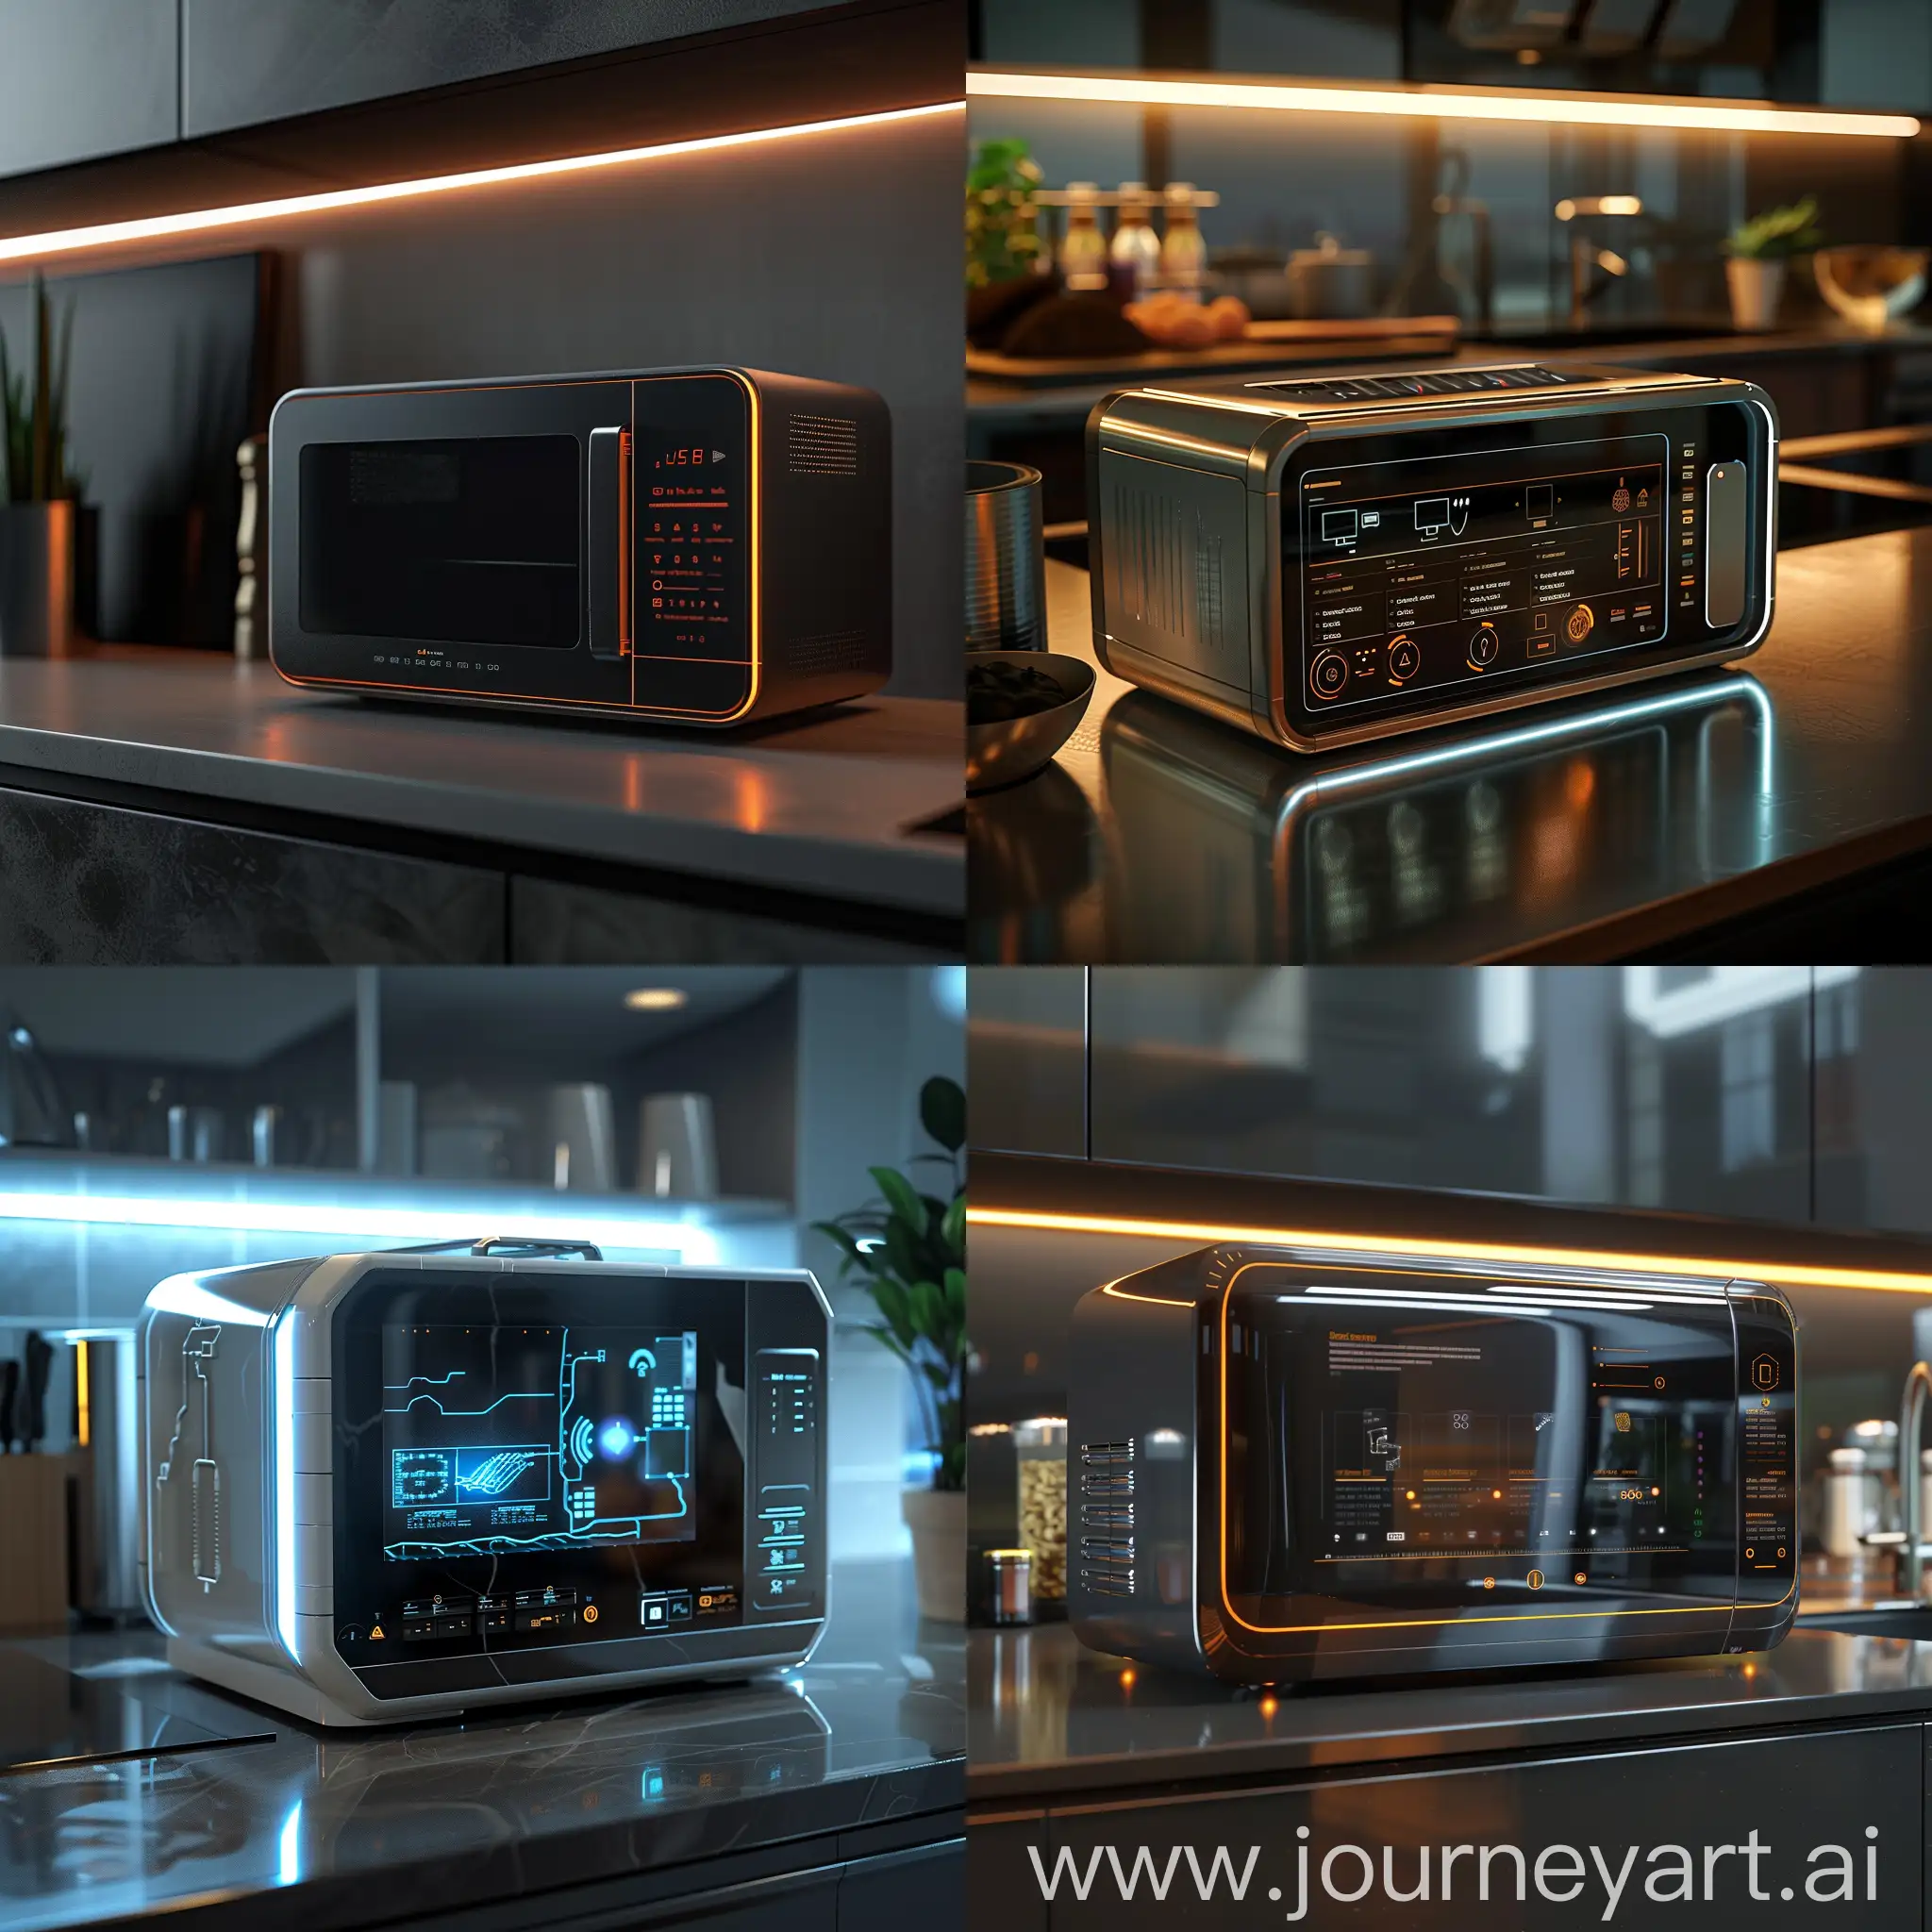 Futuristic-Microwave-Oven-with-Holographic-Controls-and-Ambient-Glow